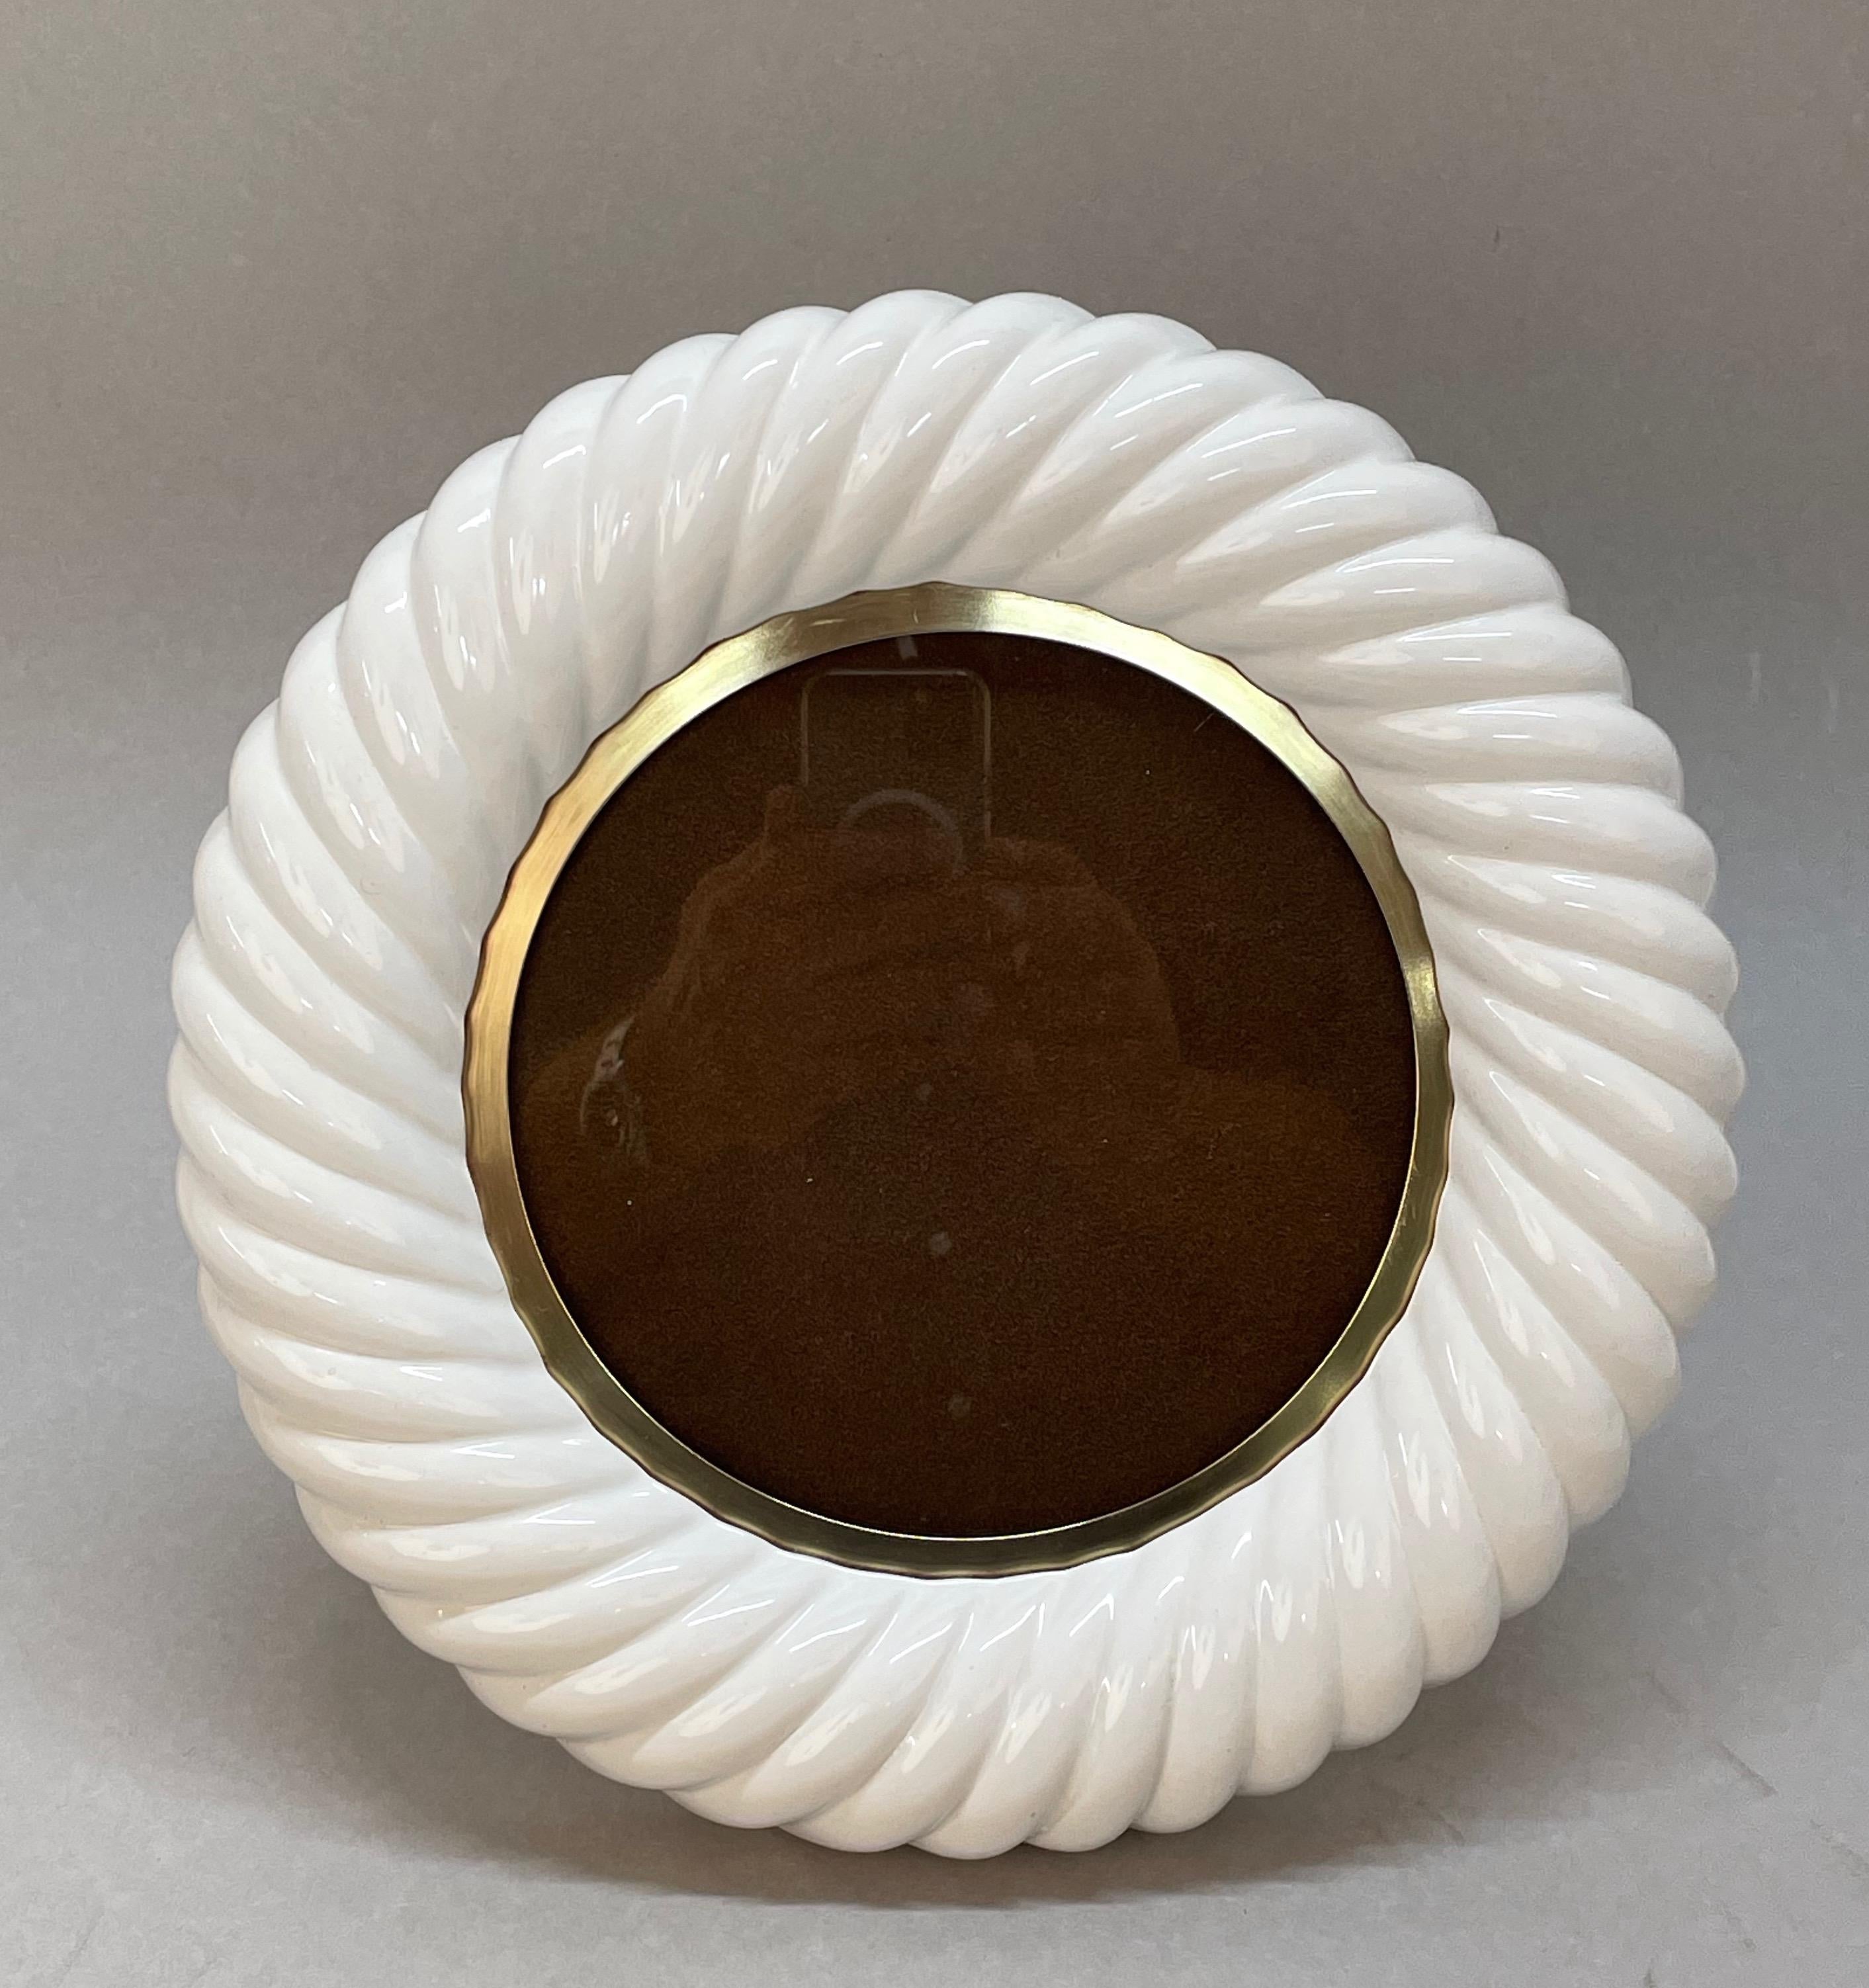 Incredible mid-century frame in white ceramic and brass. This wonderful object was designed by Tommaso Barbi, as you can see his signature on the back, in Italy in the 70s.

This piece is unique for the fine artisanal work on the white ceramic in